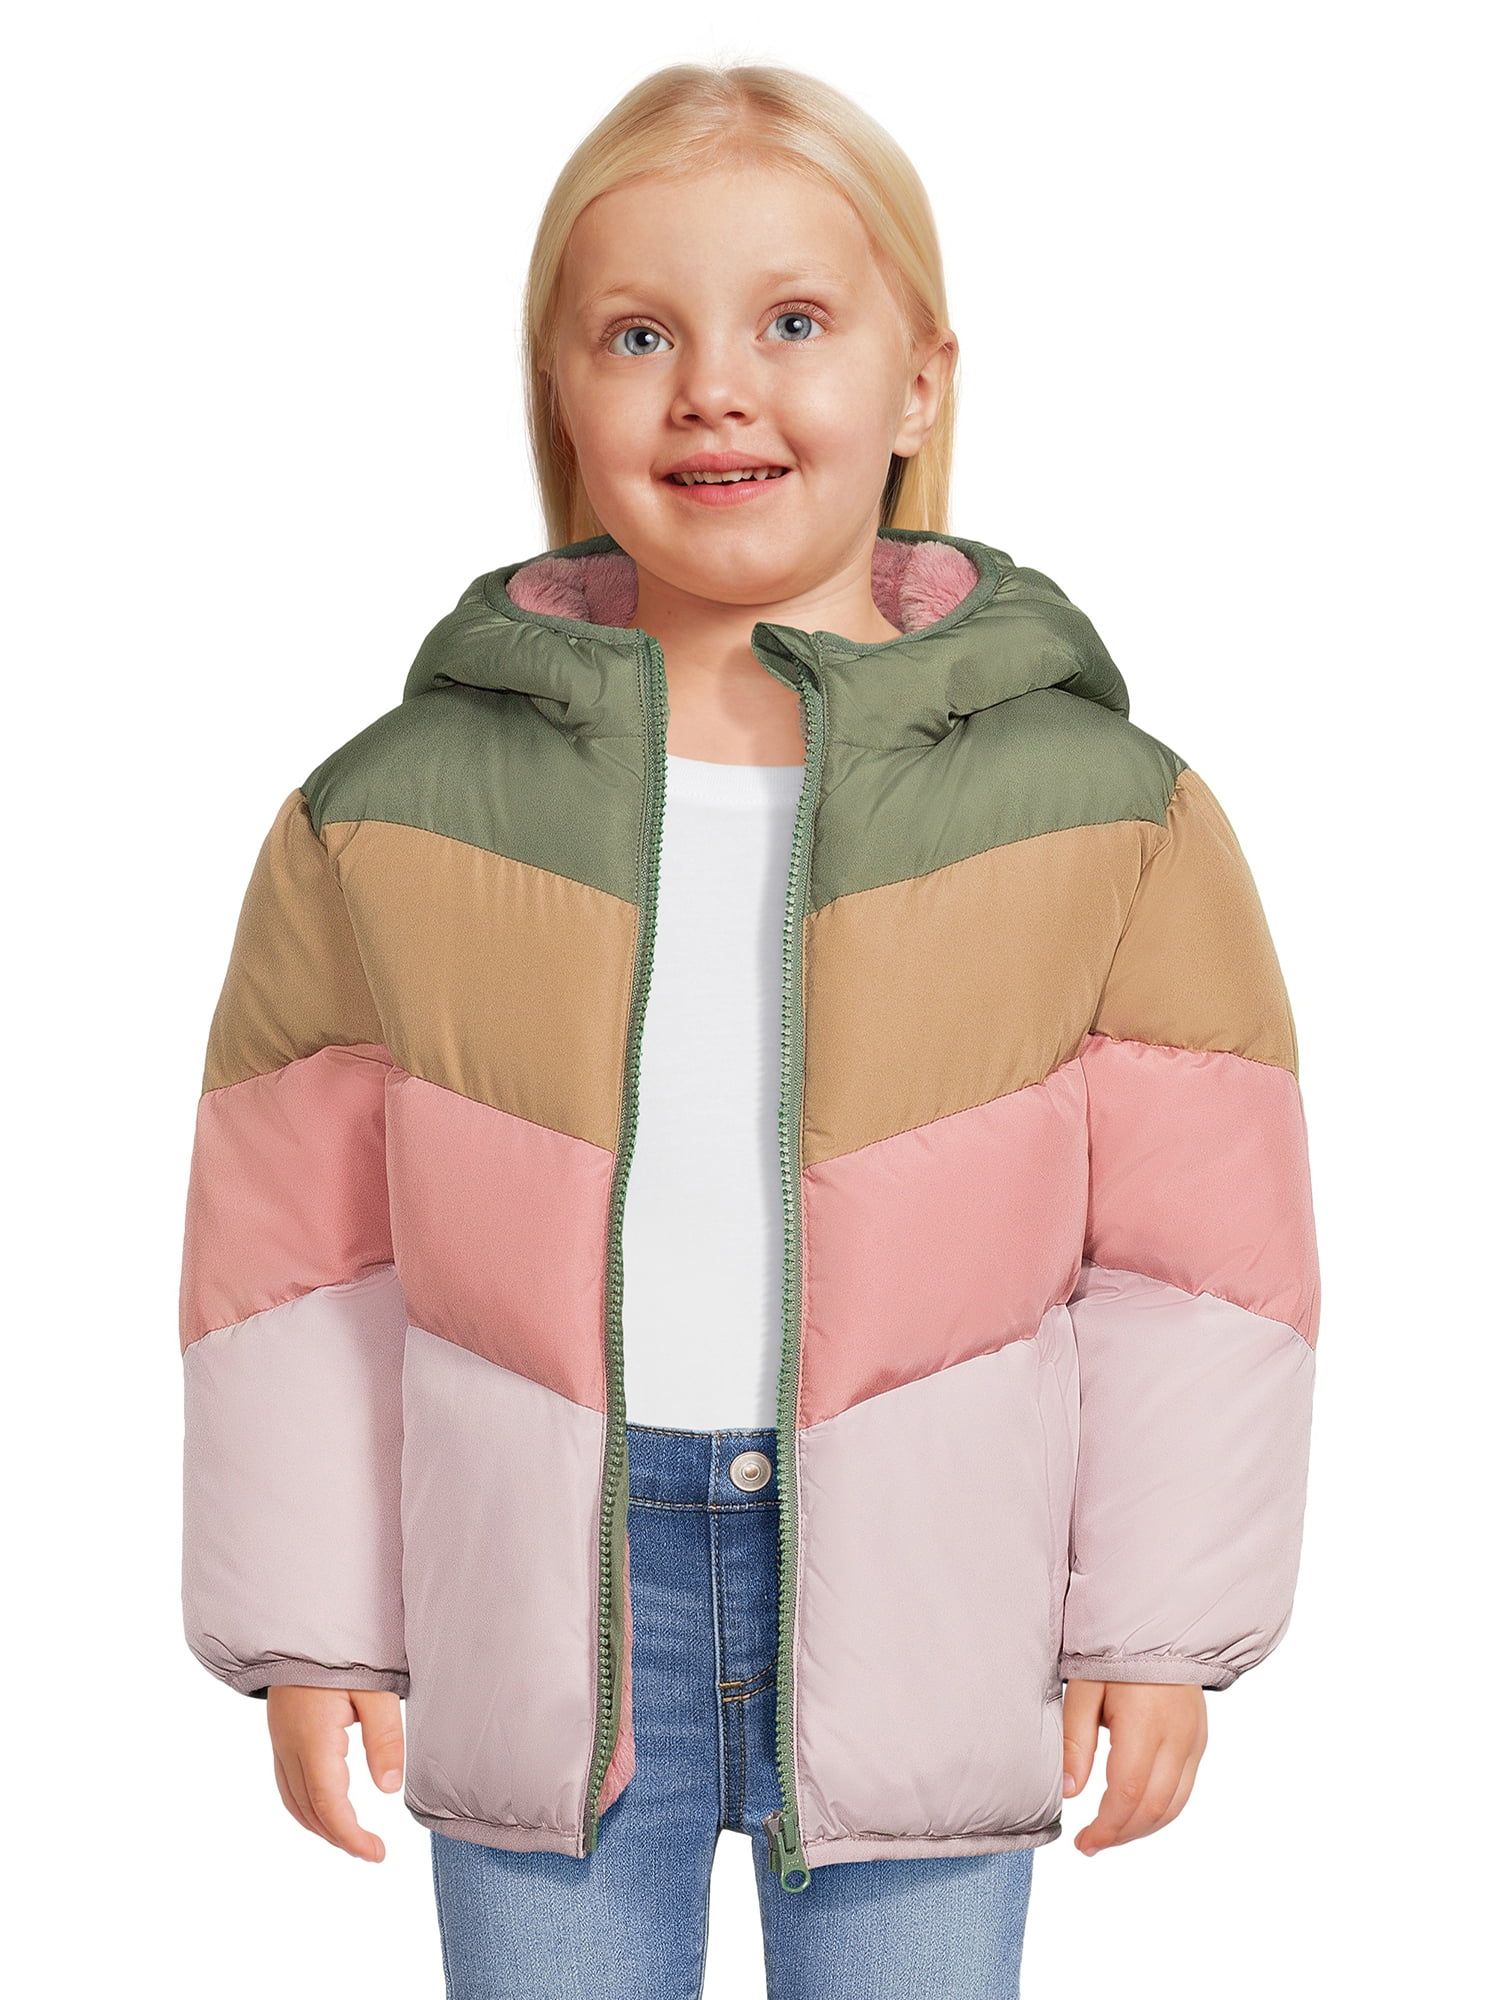 Swiss Tech Baby and Toddler Girls Puffer Jacket with Hood, Sizes 12M-5T | Walmart (US)